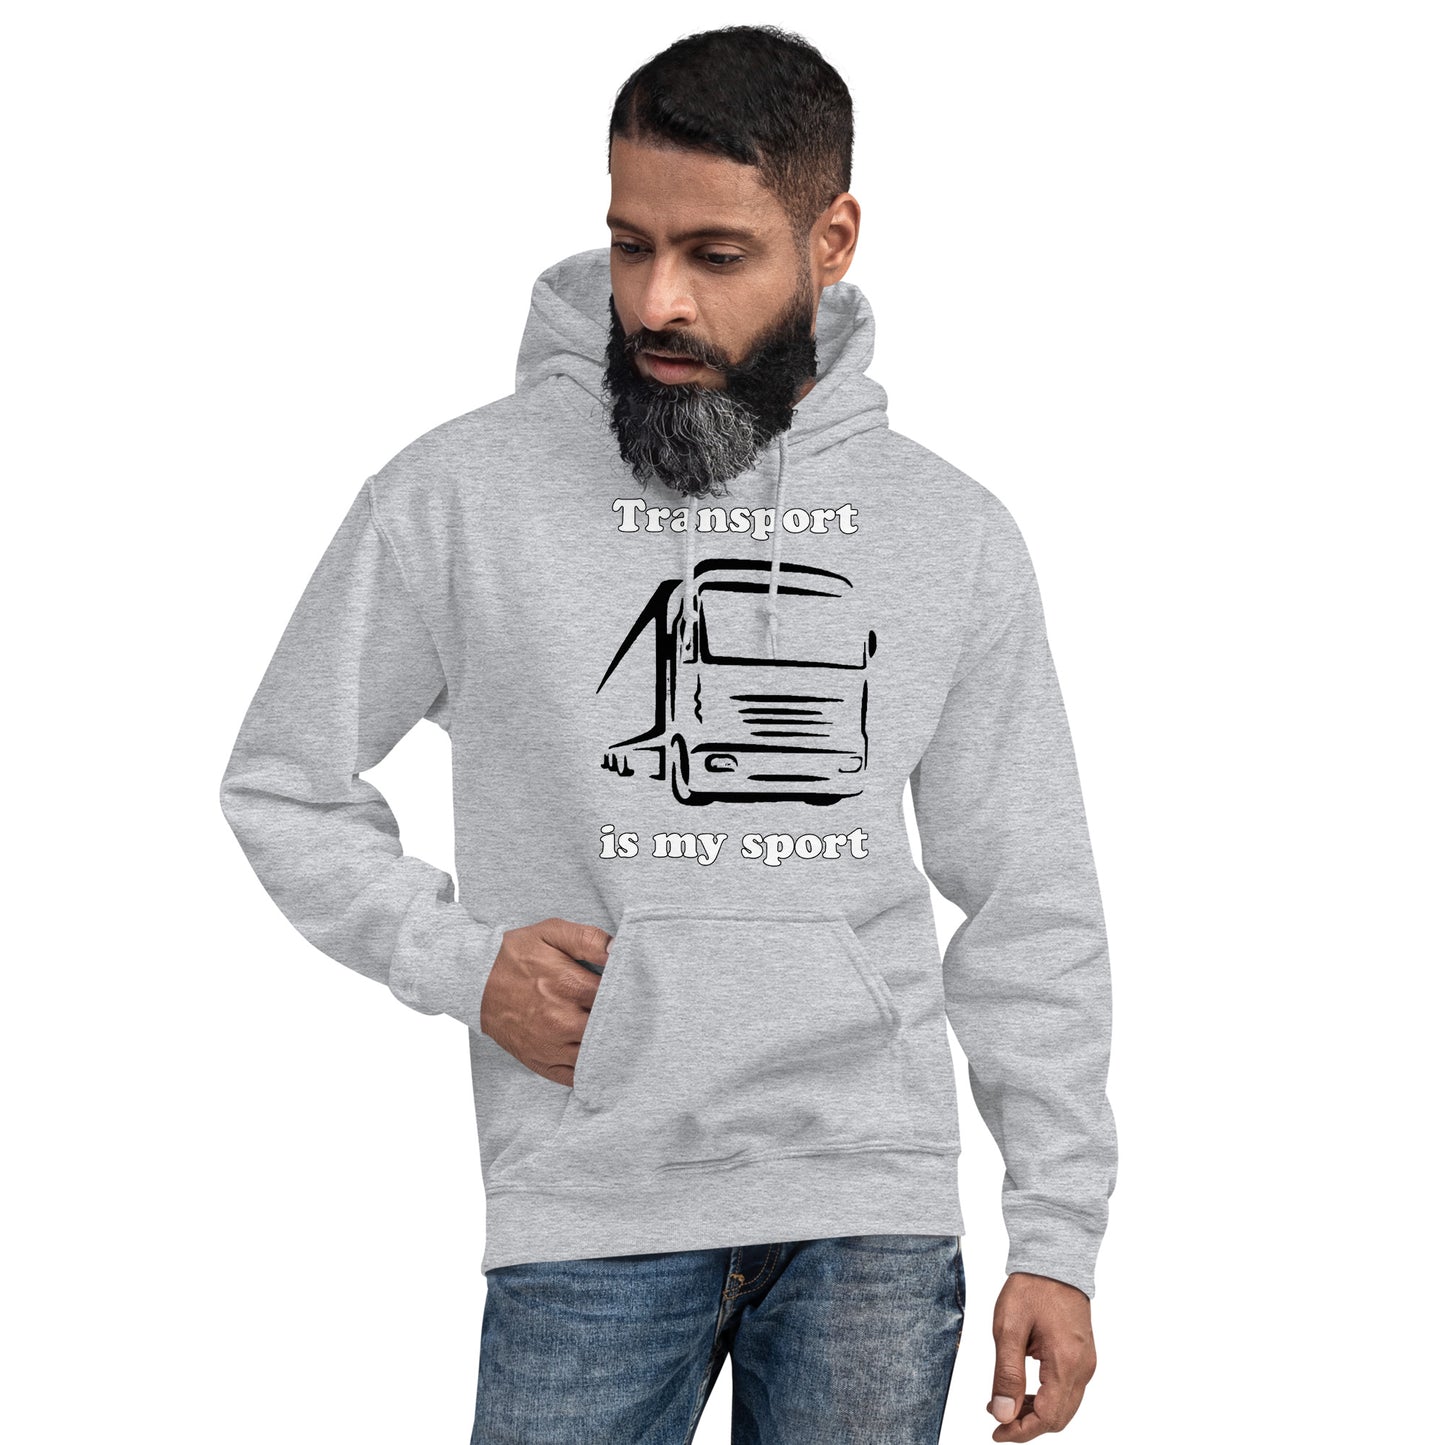 Man with grey hoodie with picture of truck and text "Transport is my sport"